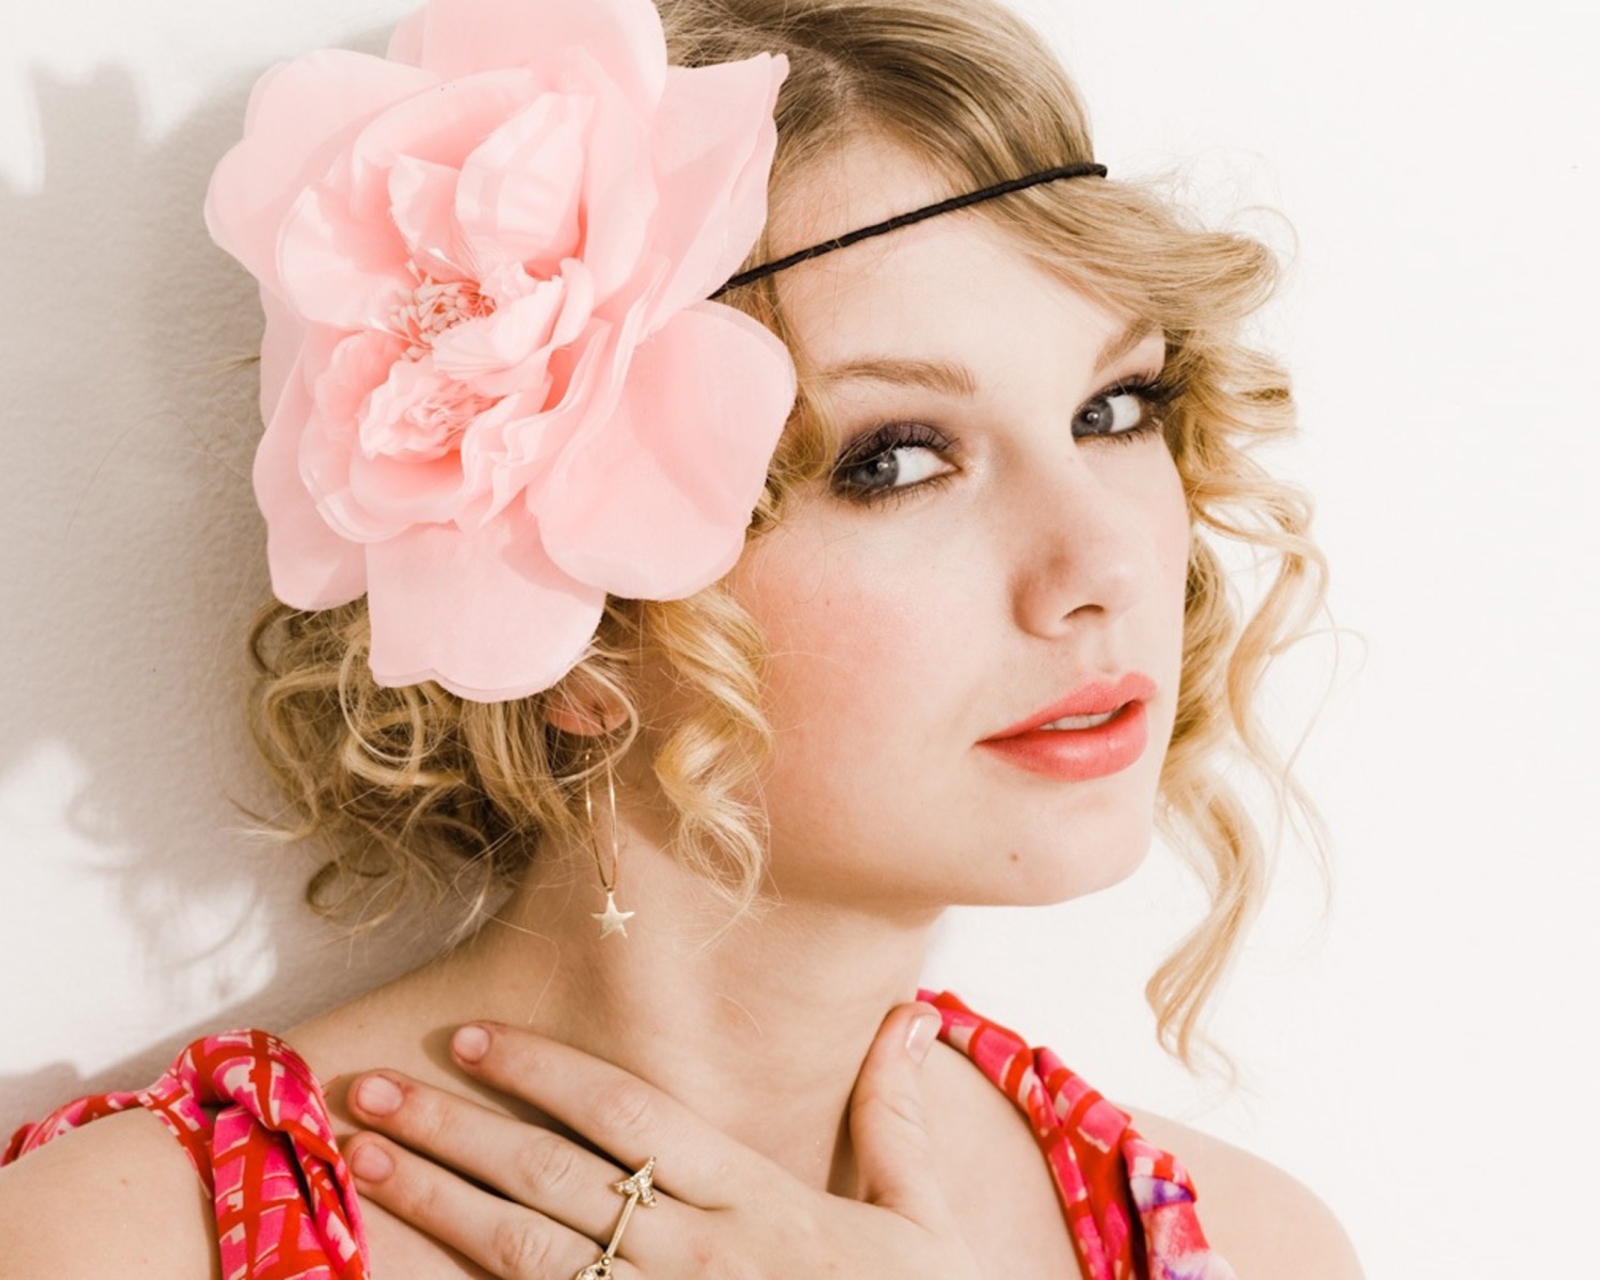 Das Taylor Swift With Pink Rose On Head Wallpaper 1600x1280